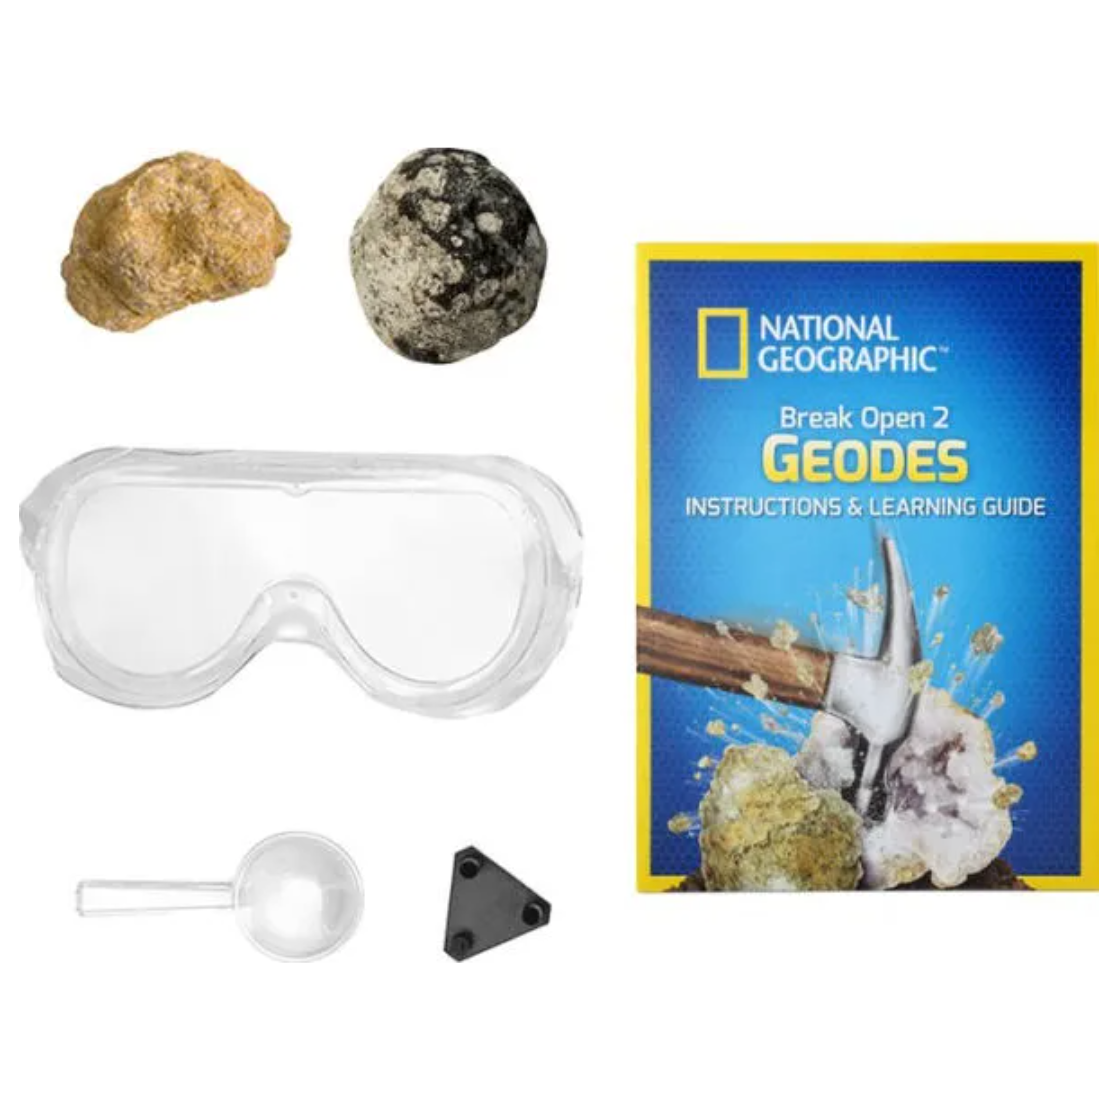 National Geographic - Break Your Own Geode 2pc